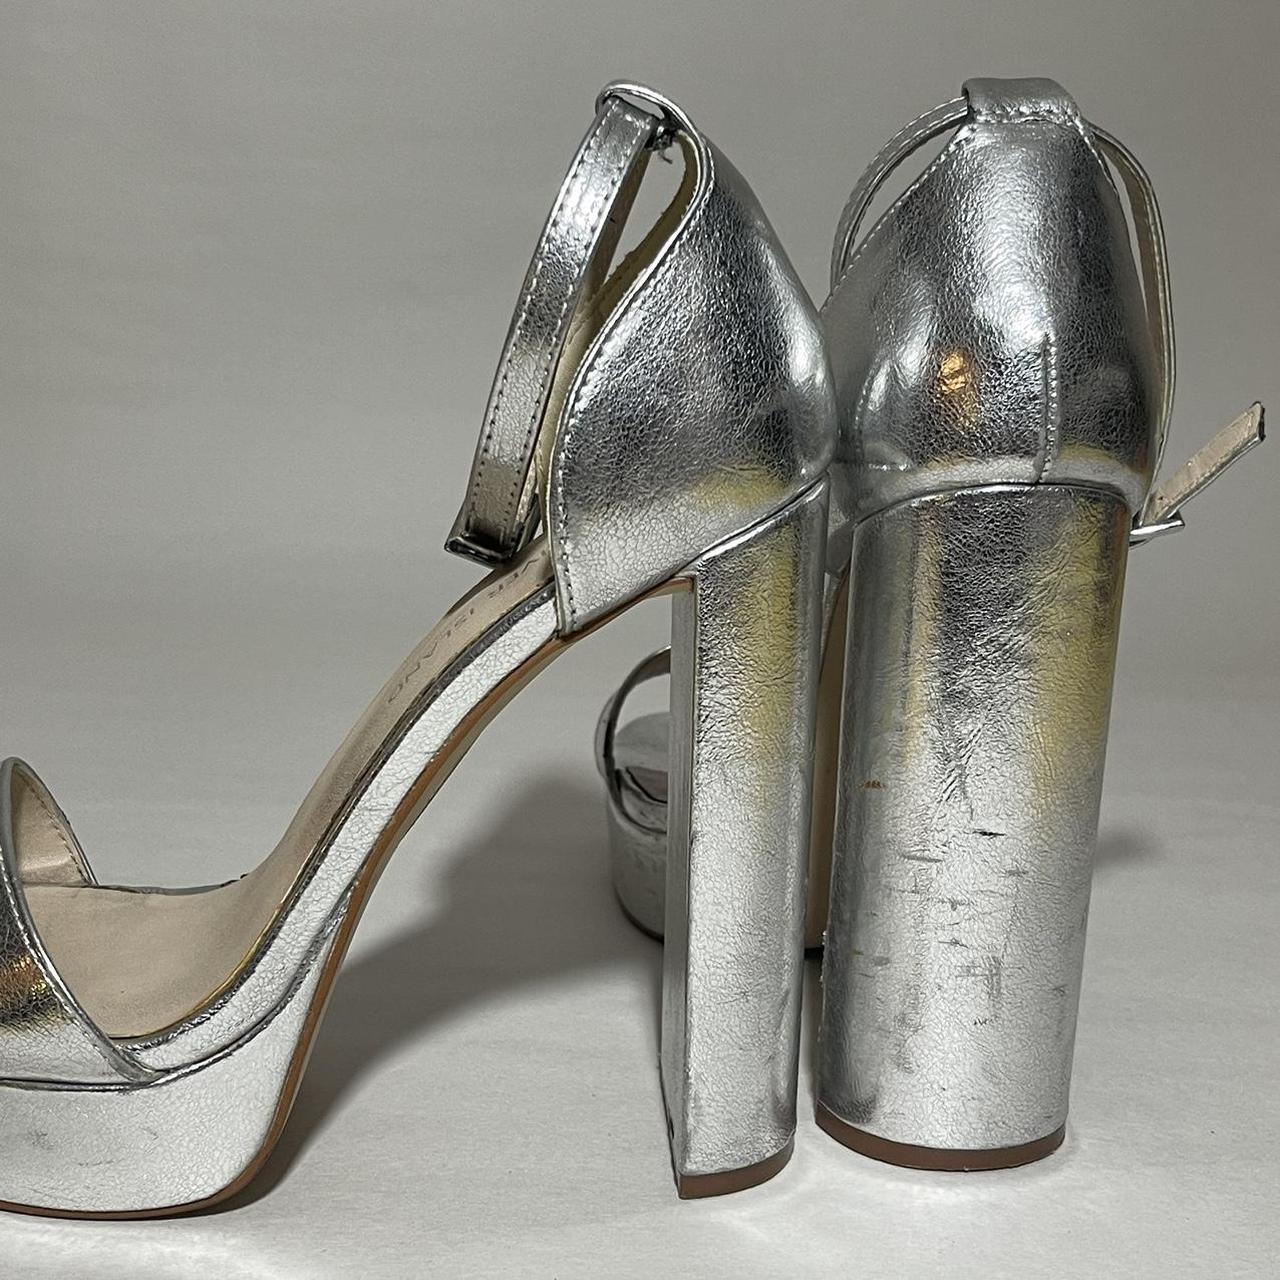 River Island Women's Silver Courts (2)